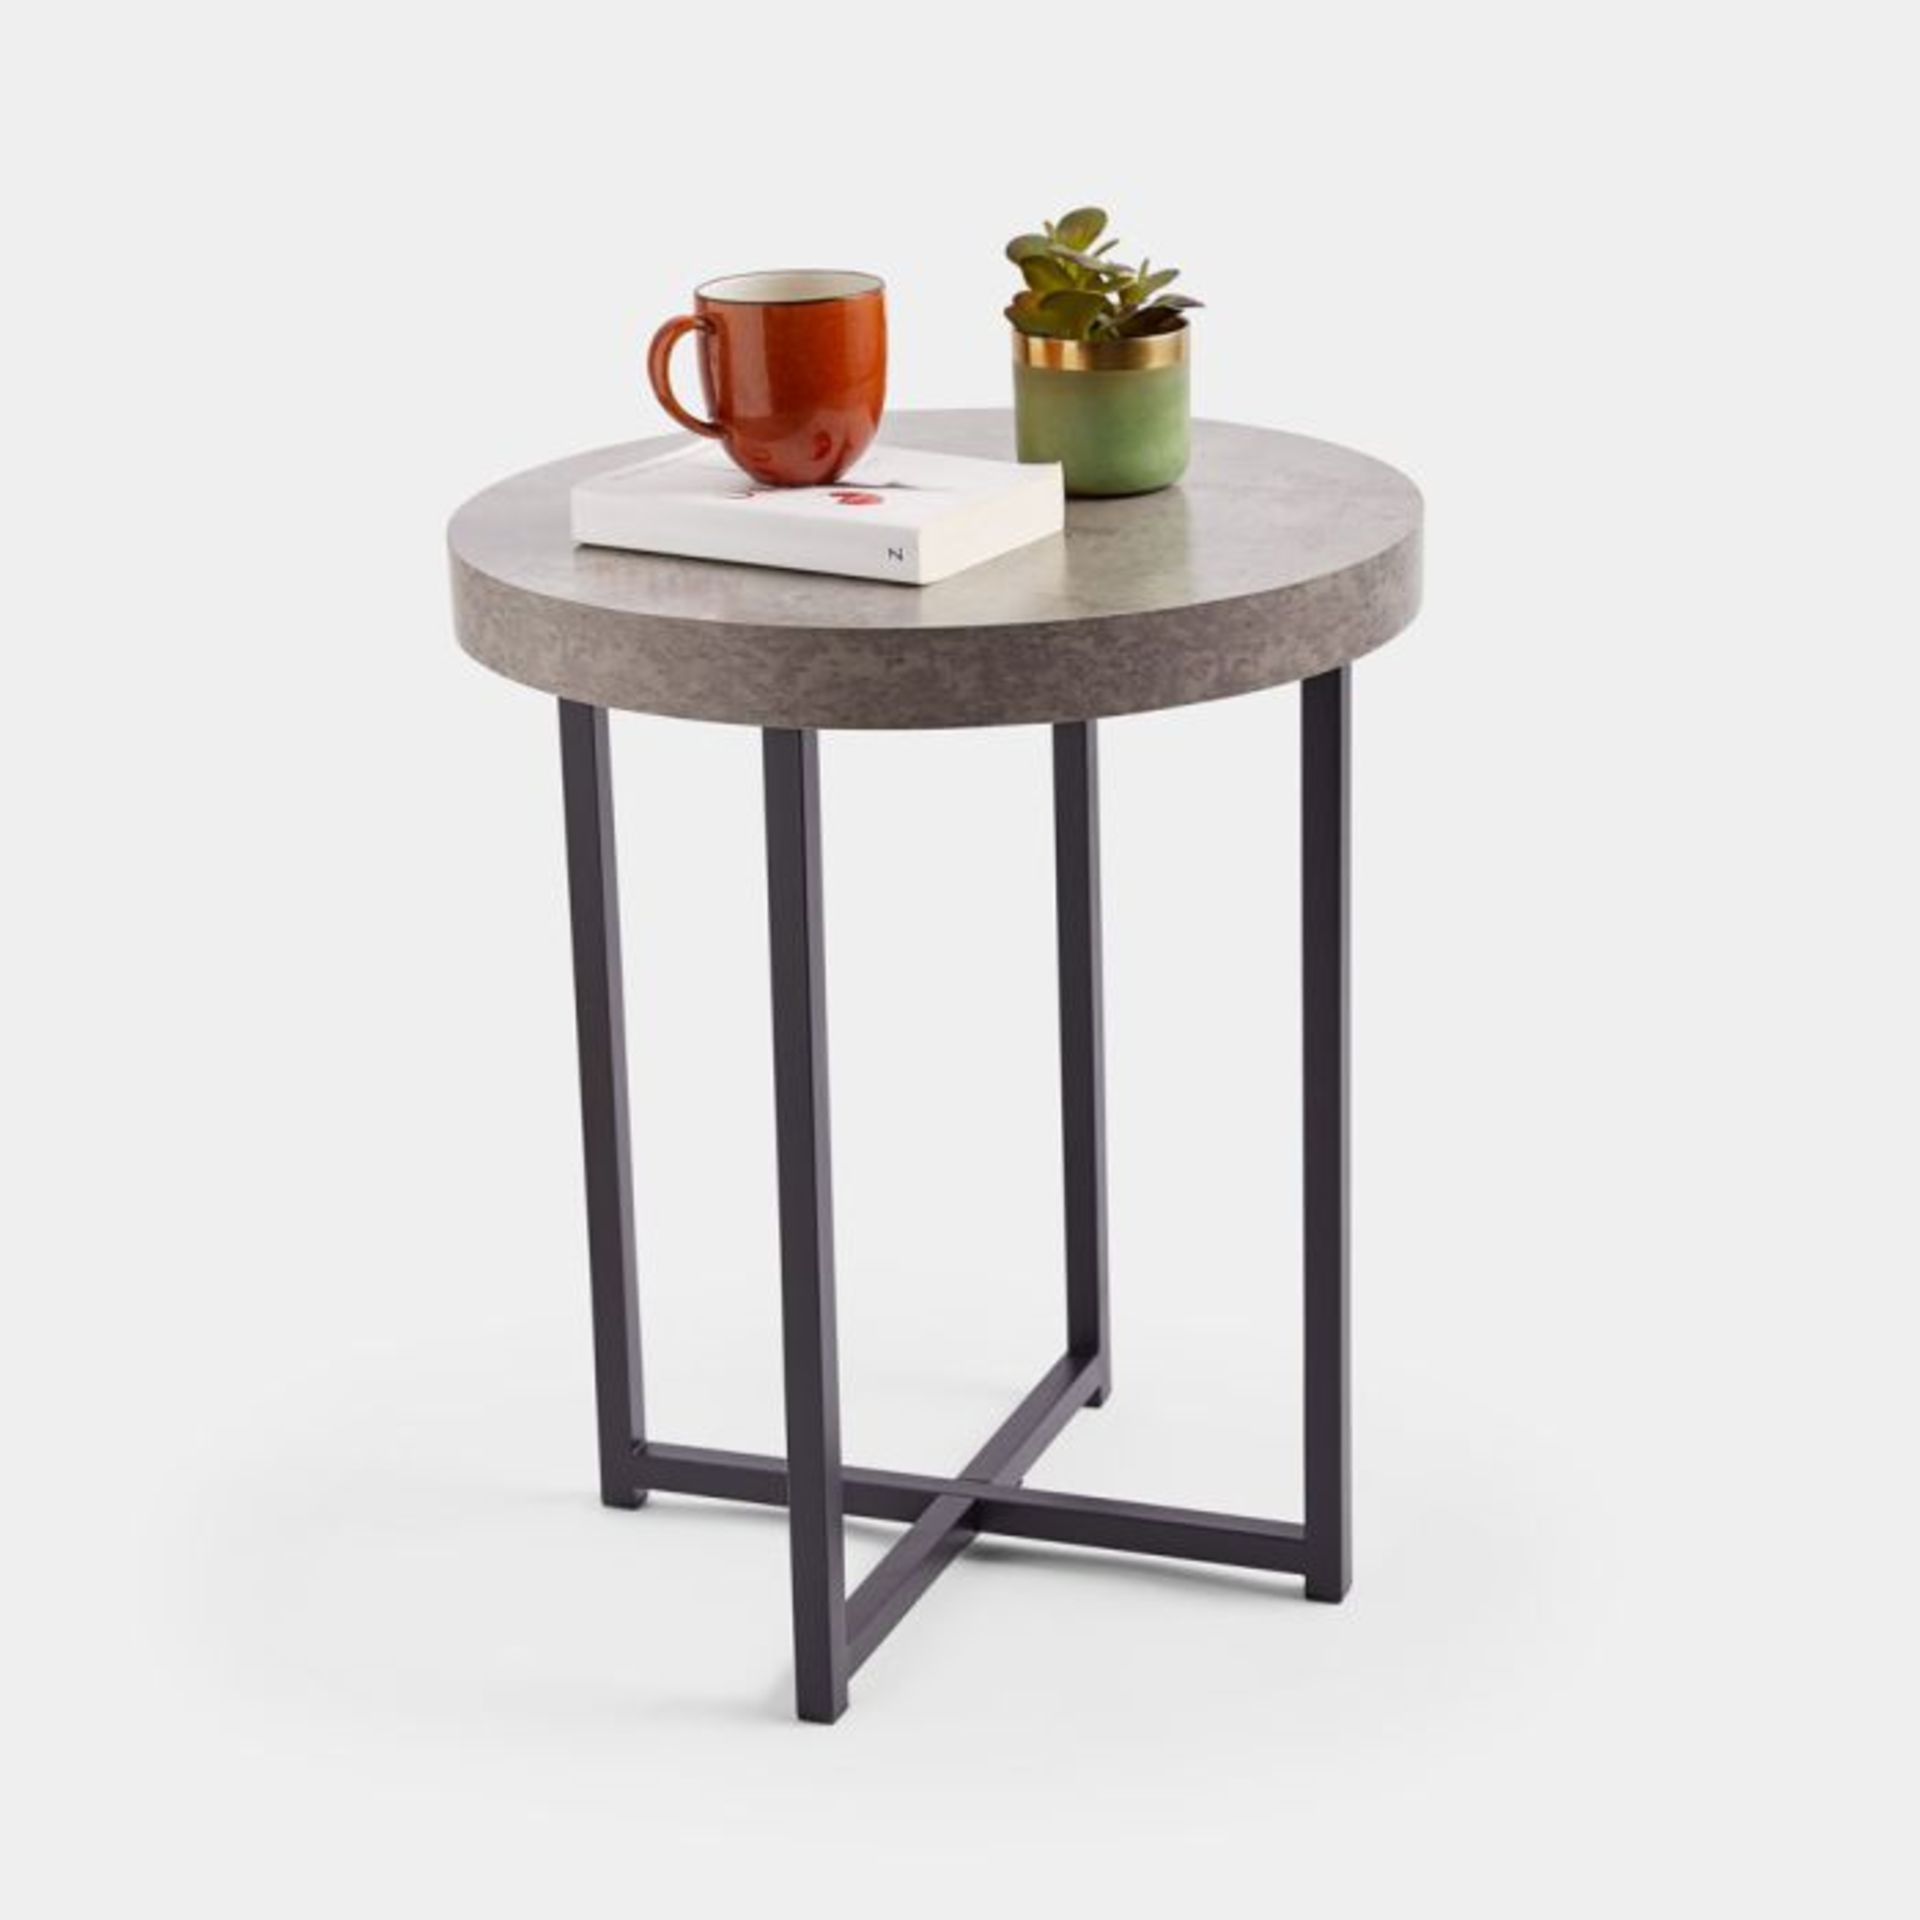 Concrete Effect Side Table. - ER33. Whether you want to add a touch of modern appeal to a classic